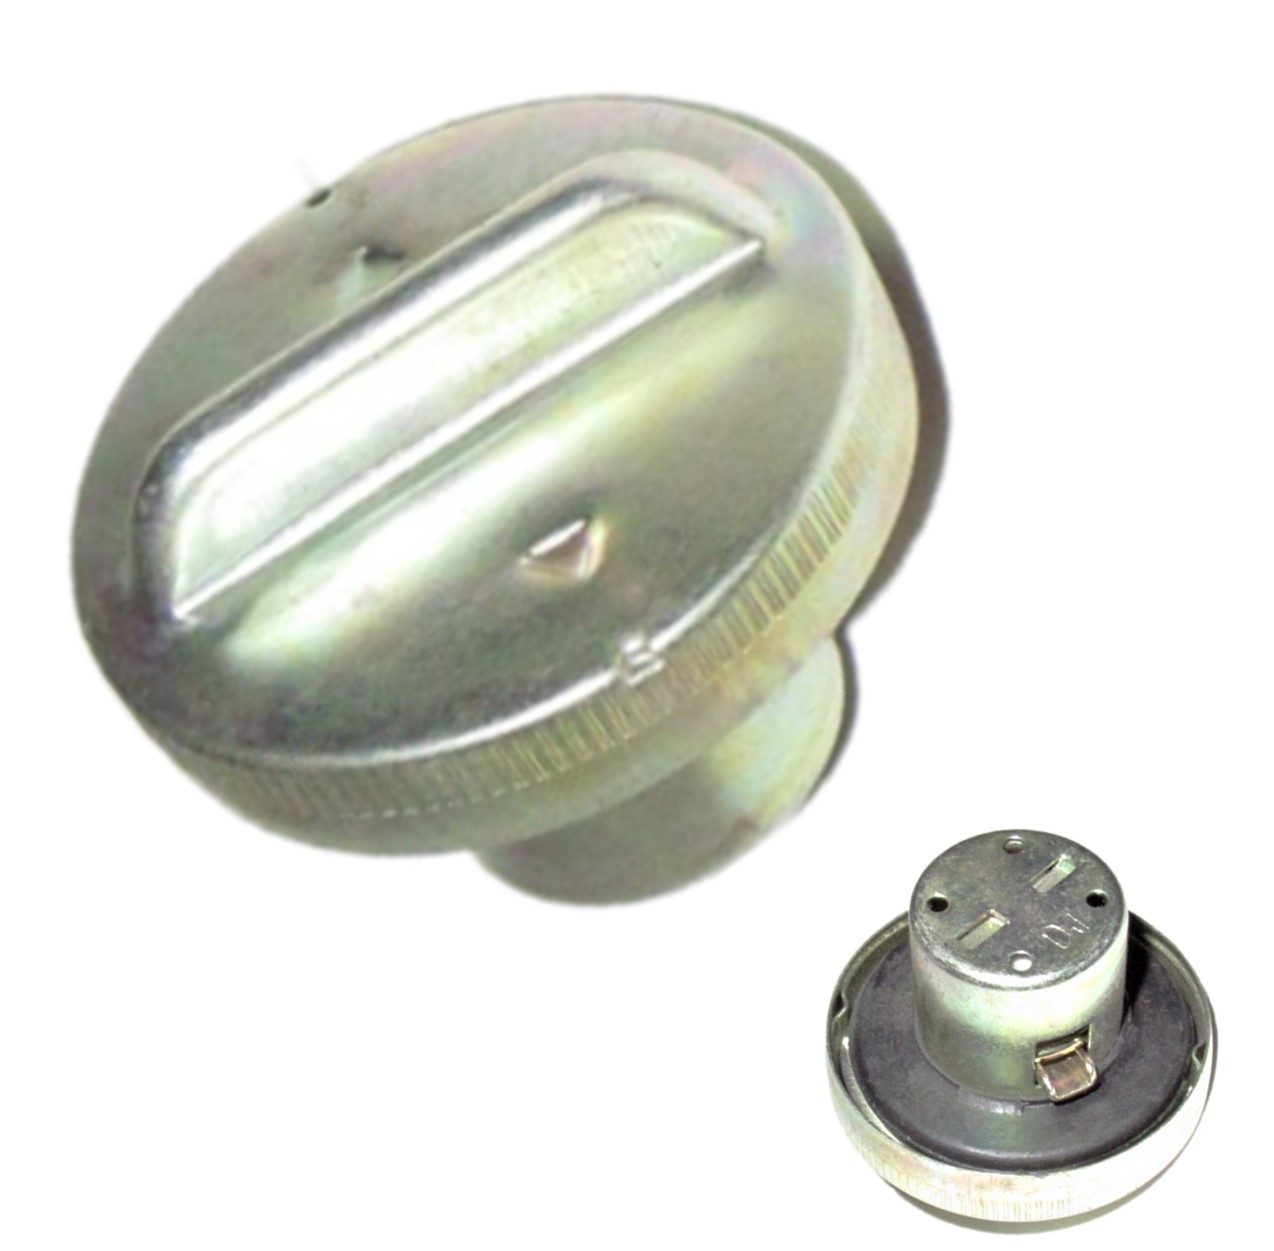 GAS CAP w/Turn Tab Inner Shaft=30mm, Top OD=55mm Fits Many Taiwan and Chinese 49-149cc Scooters, ATVs & Dirt Bikes.